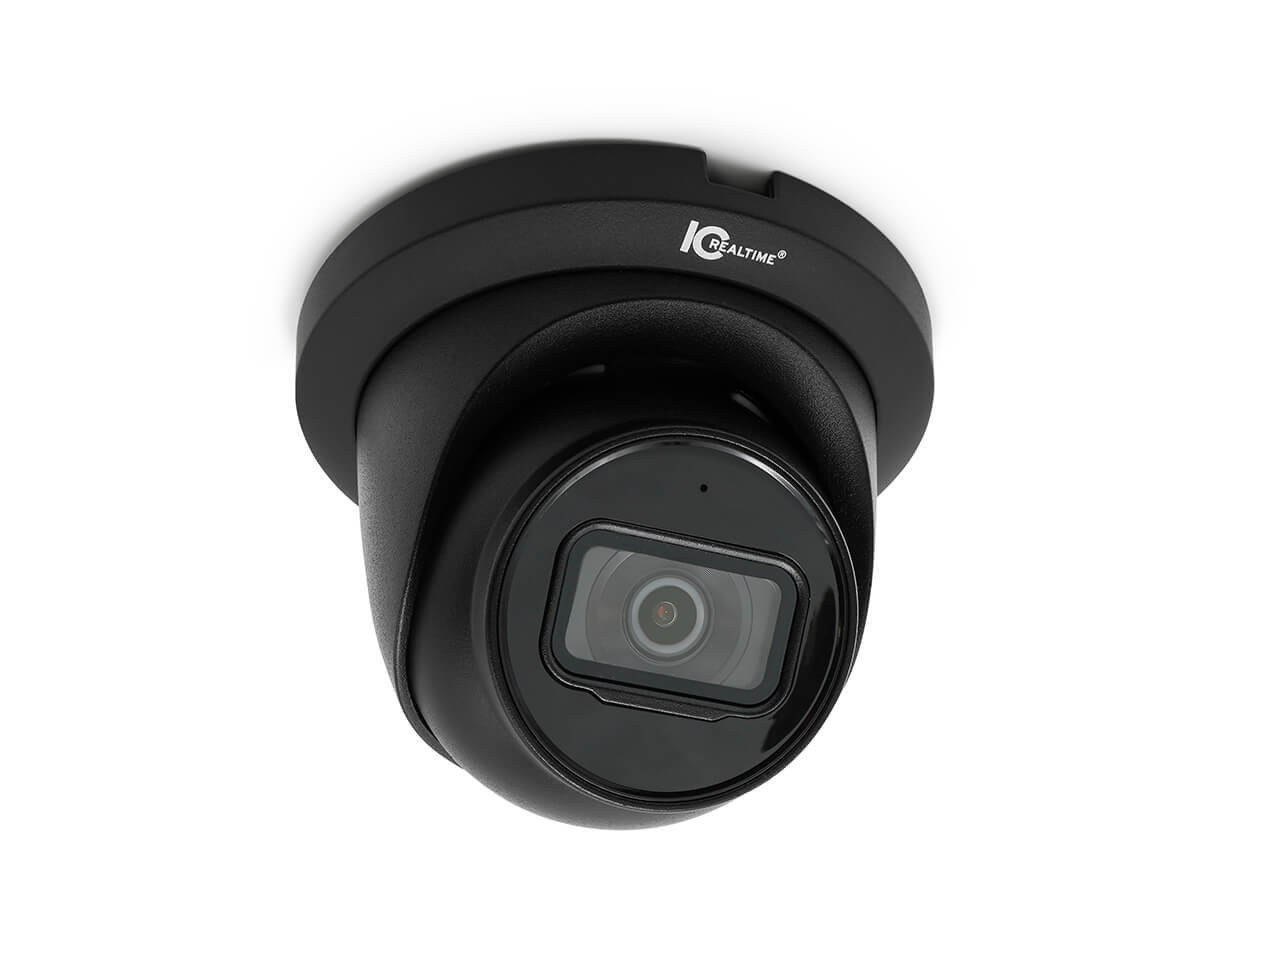 IPEL-E80F-IRB2 8MP IP Indoor/Outdoor Mid-Size Eyeball Dome Camera/Fixed 2.8mm Lens/98.4ft Smart IR/PoE/Black by ICRealtime